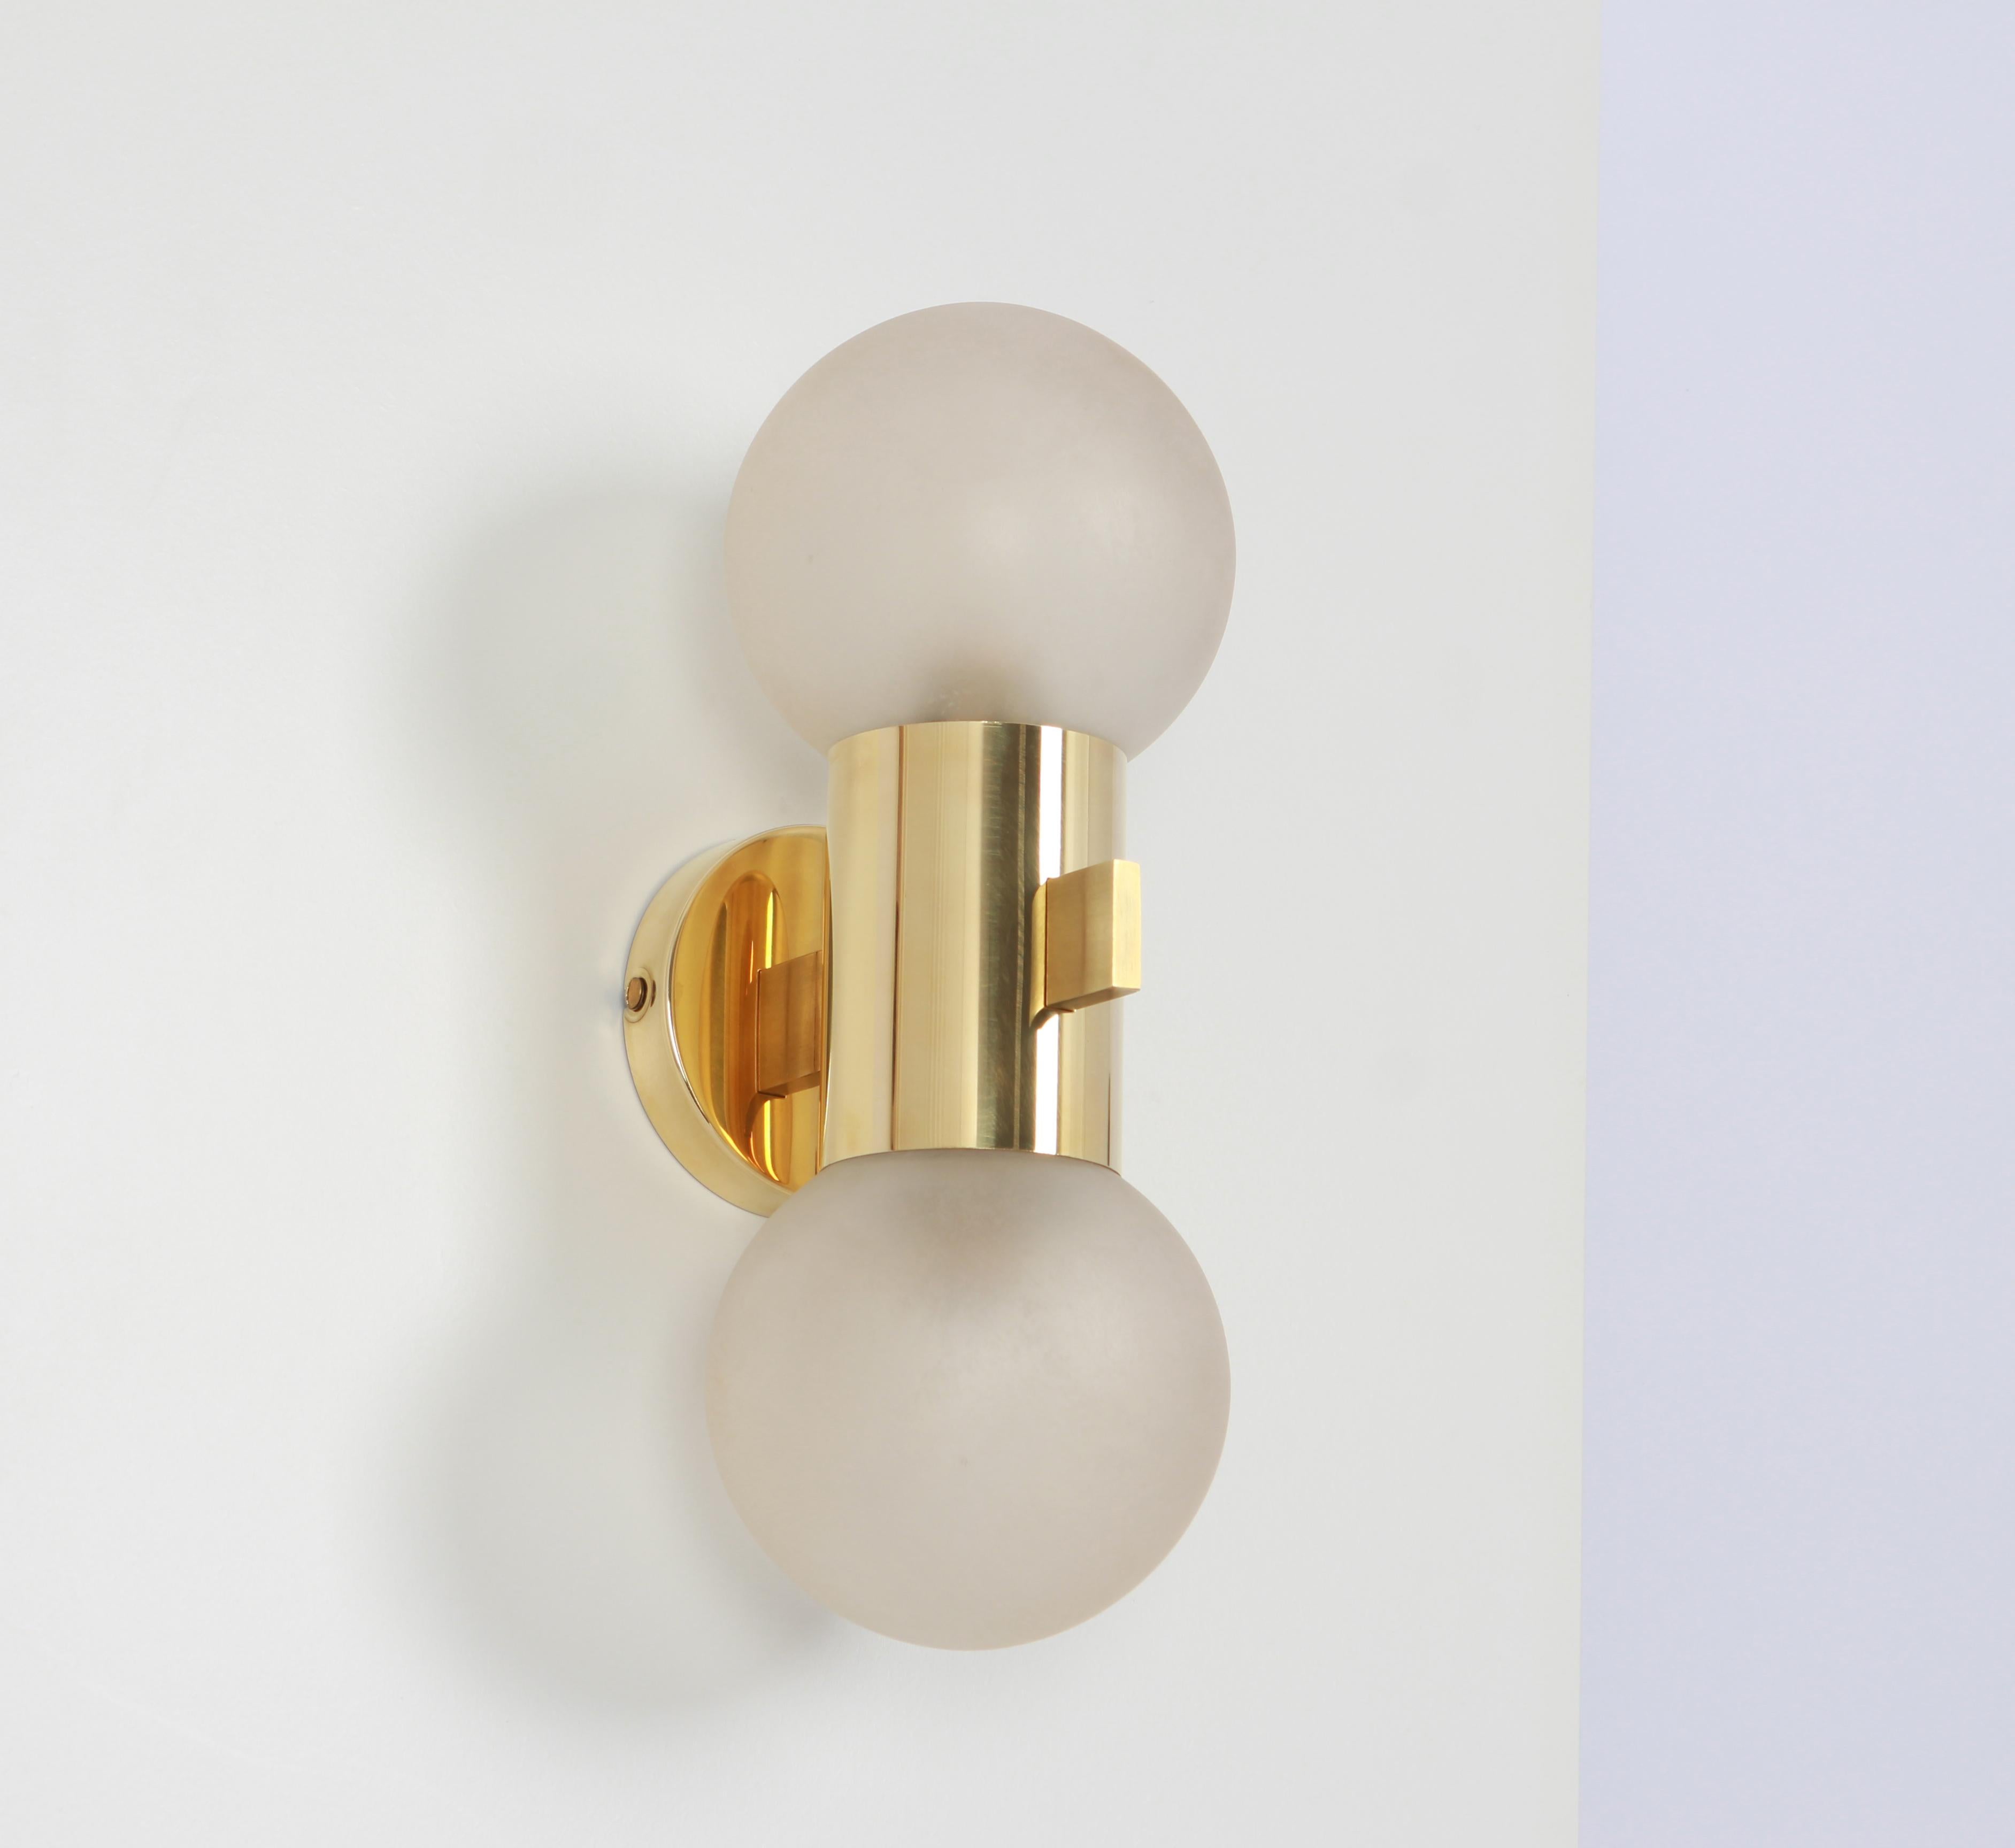 Pair of Brass and Satin Glass Sconces, Sciolari Stil, Germany, 1970s For Sale 1